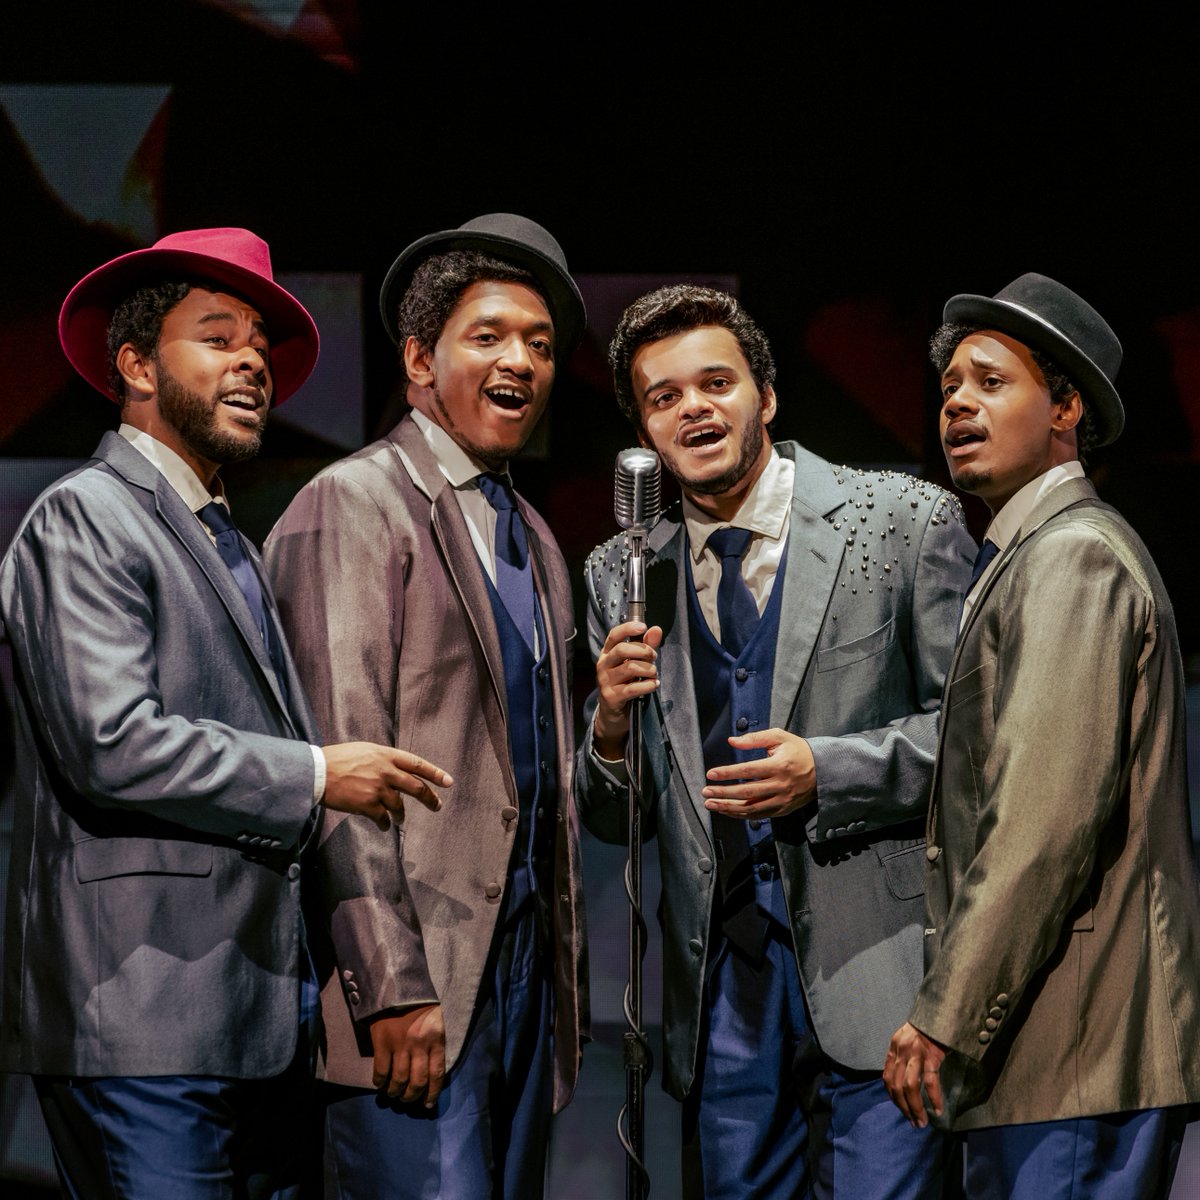 The Drifters Girl is here until Saturday! Don’t miss the phenomenal soundtrack packed full of iconic songs like Saturday Night At The Movies and Save The Last Dance For Me. Book now. wmc.org.uk/en/whats-on/20…